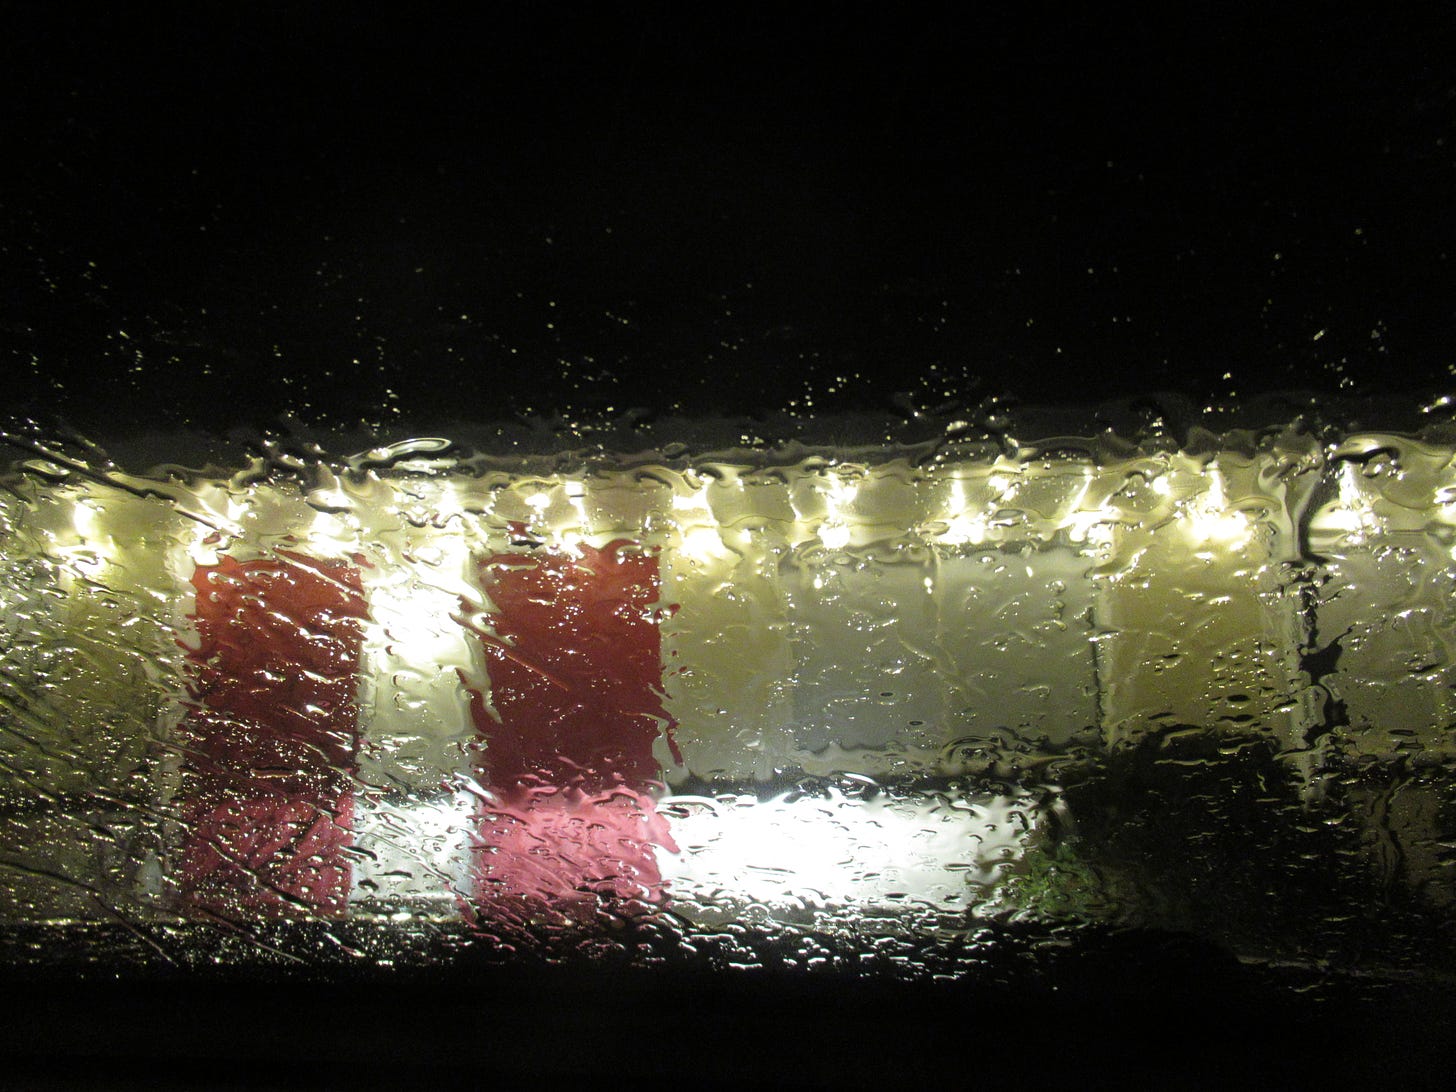 Facade of a vintage motor lodge viewd through the rain streaked windshield of a vehicle in front of it. The doors are bight red and there are blurry lights lining it